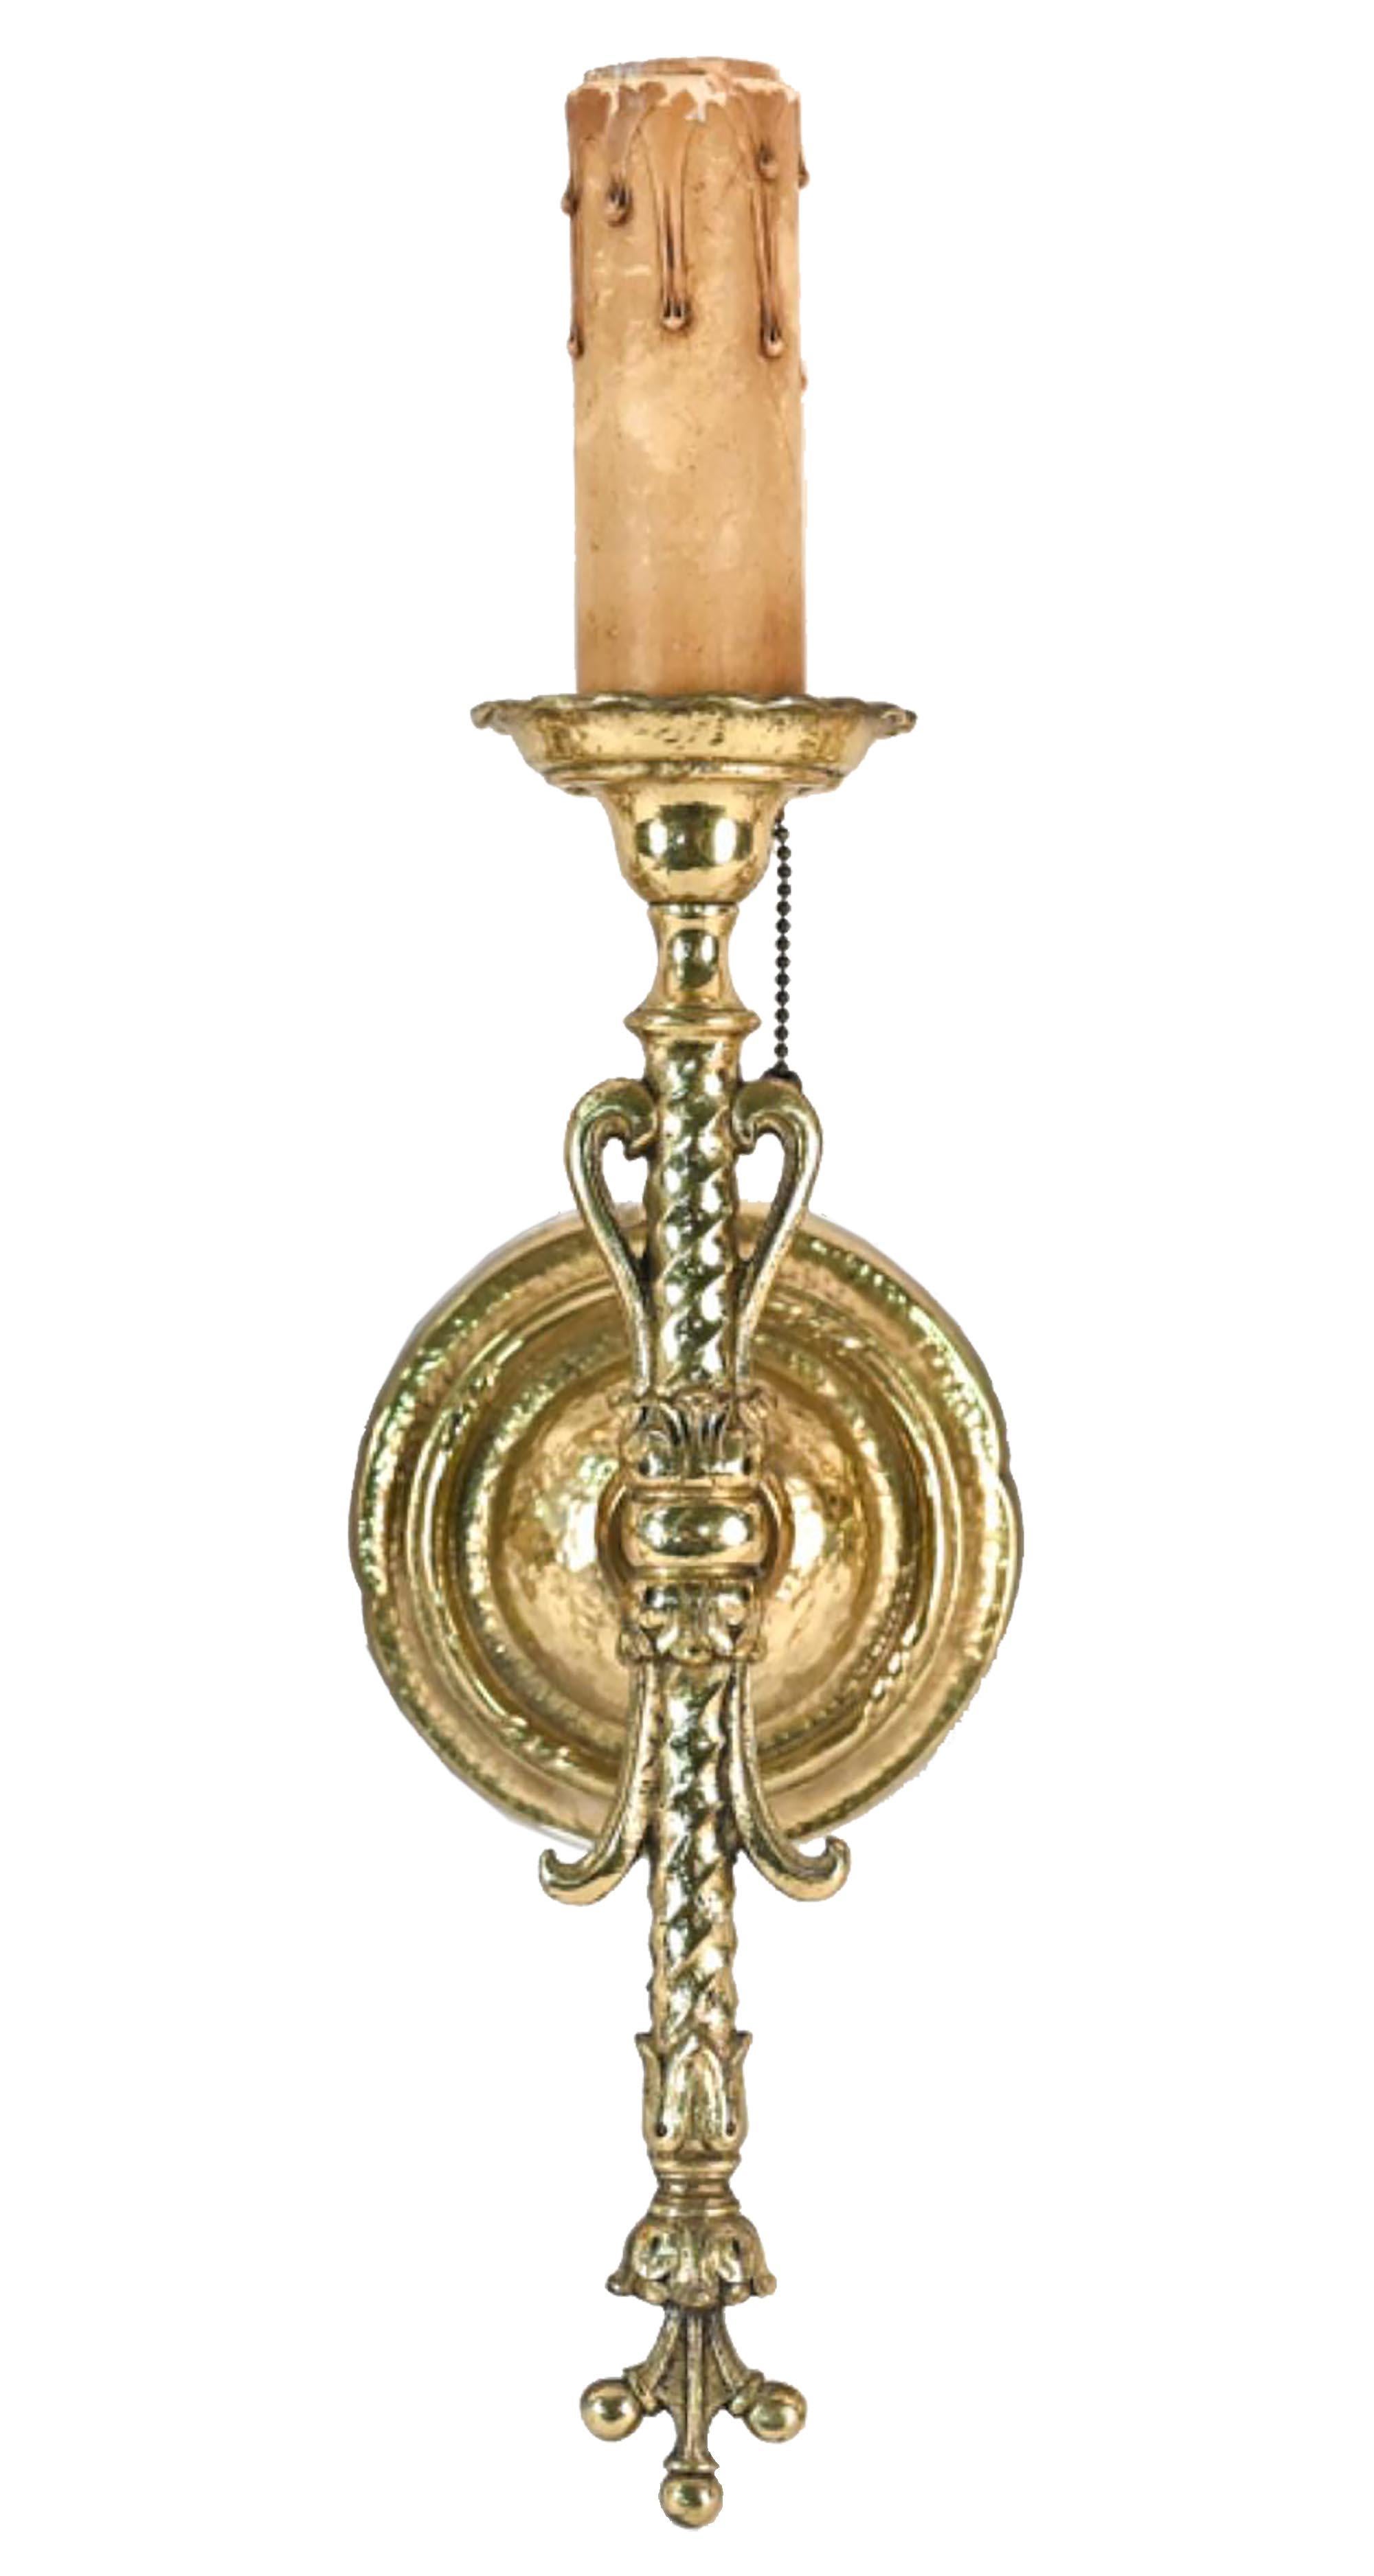 5 Sconces Available

AA# 49931
Circa: 1920
Condition: Wear Consistent with Age & Use, Well Made
Material: Cast Brass Body 
Finish: Polished Brass with Slight Patina
Country of origin: USA
Illumination: 1 Edison medium sockets

Dimensions: